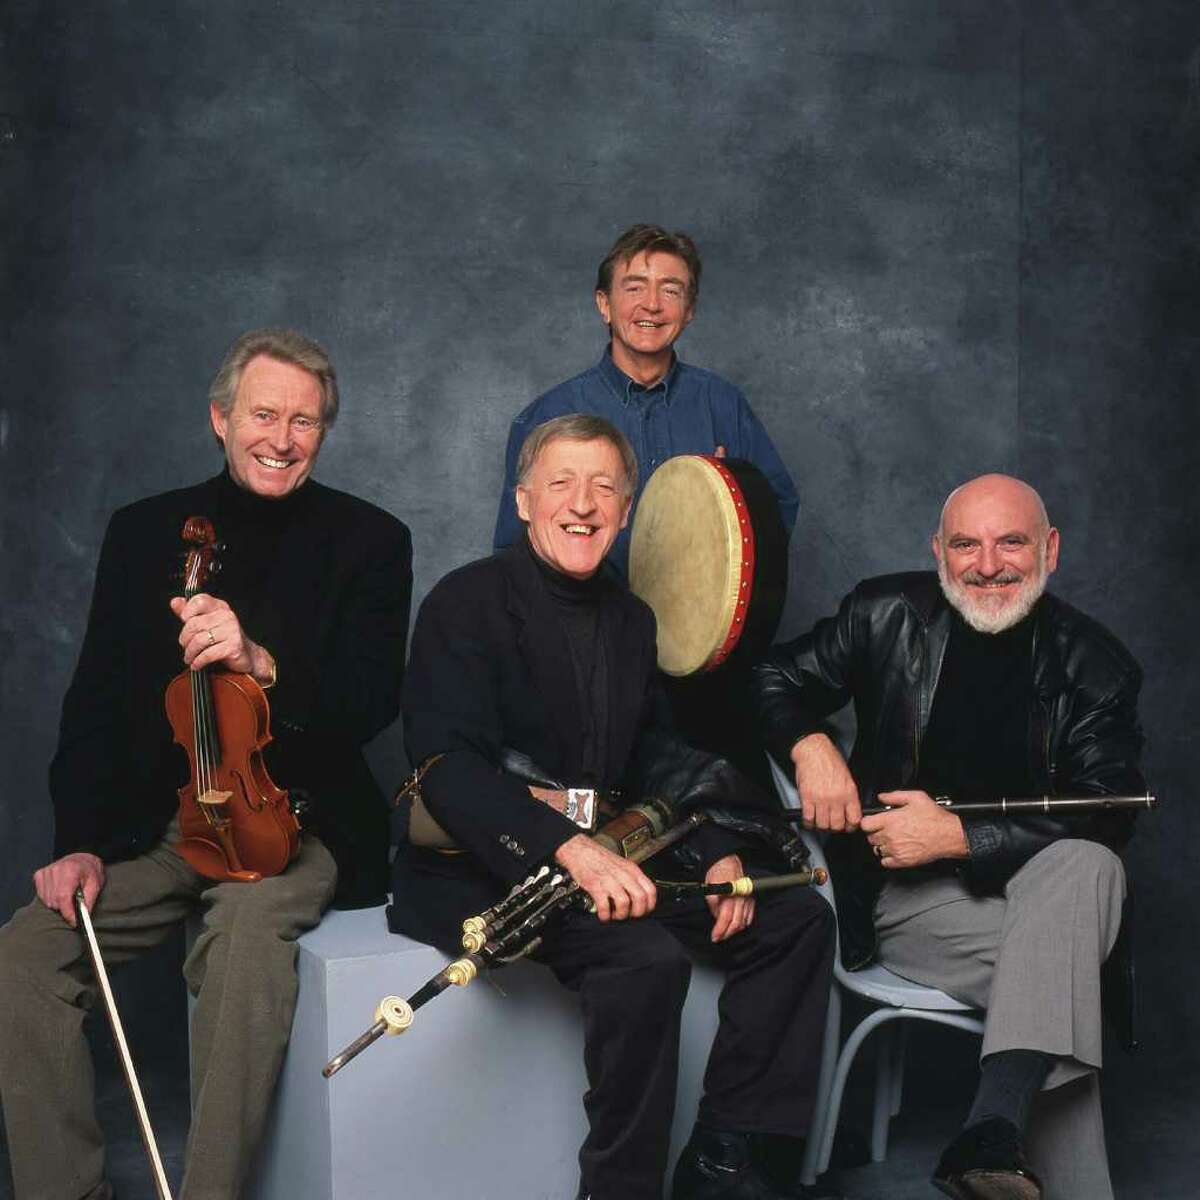 The Chieftains are Sean Keane, from left, Paddy Moloney, Kevin Conneff and Matt Molloy.